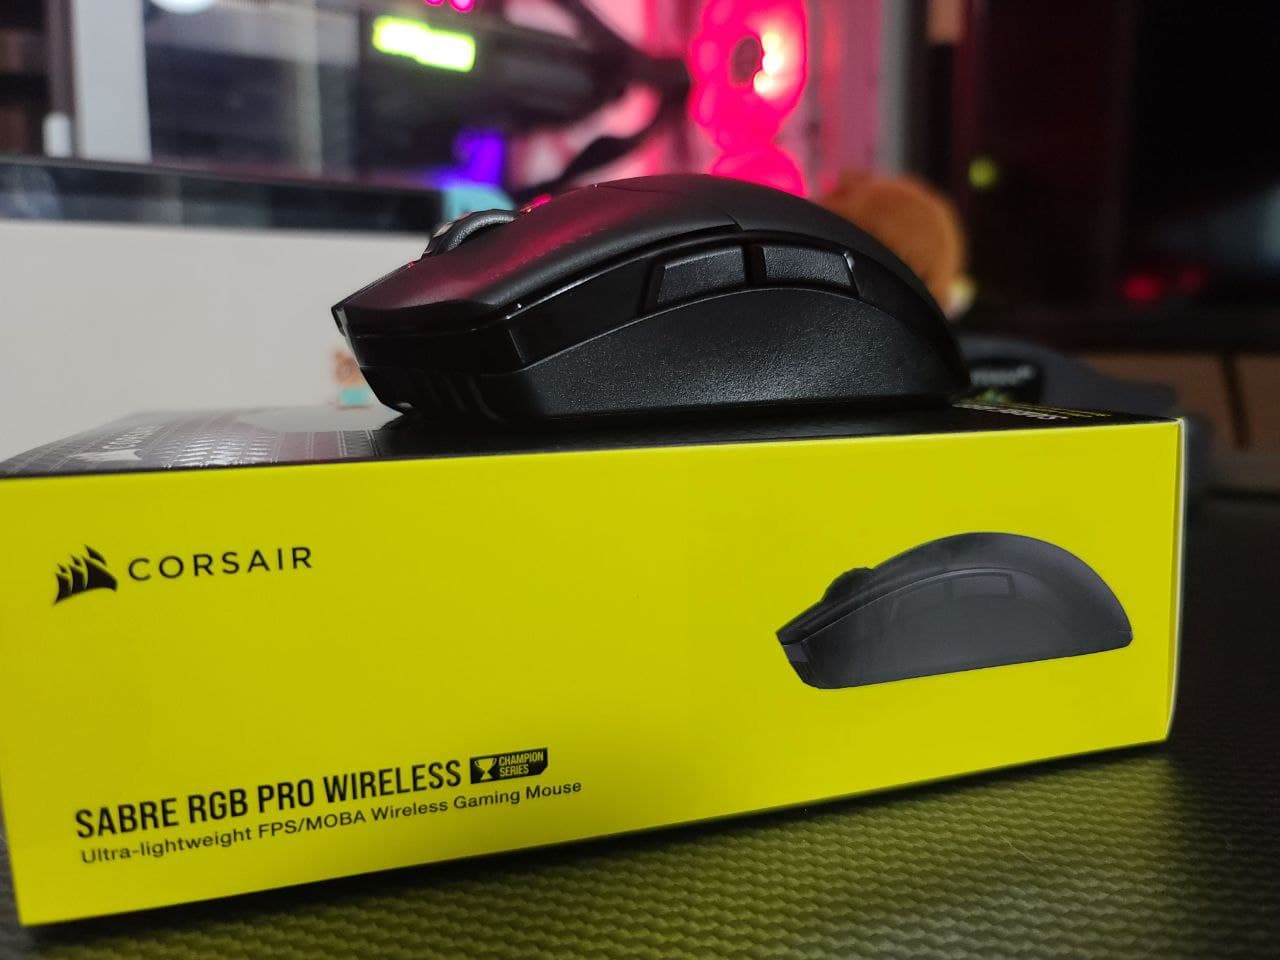 Corsair Sabre RGB Pro Wireless Mouse Review (Hardware) - Official GBAtemp  Review | GBAtemp.net - The Independent Video Game Community